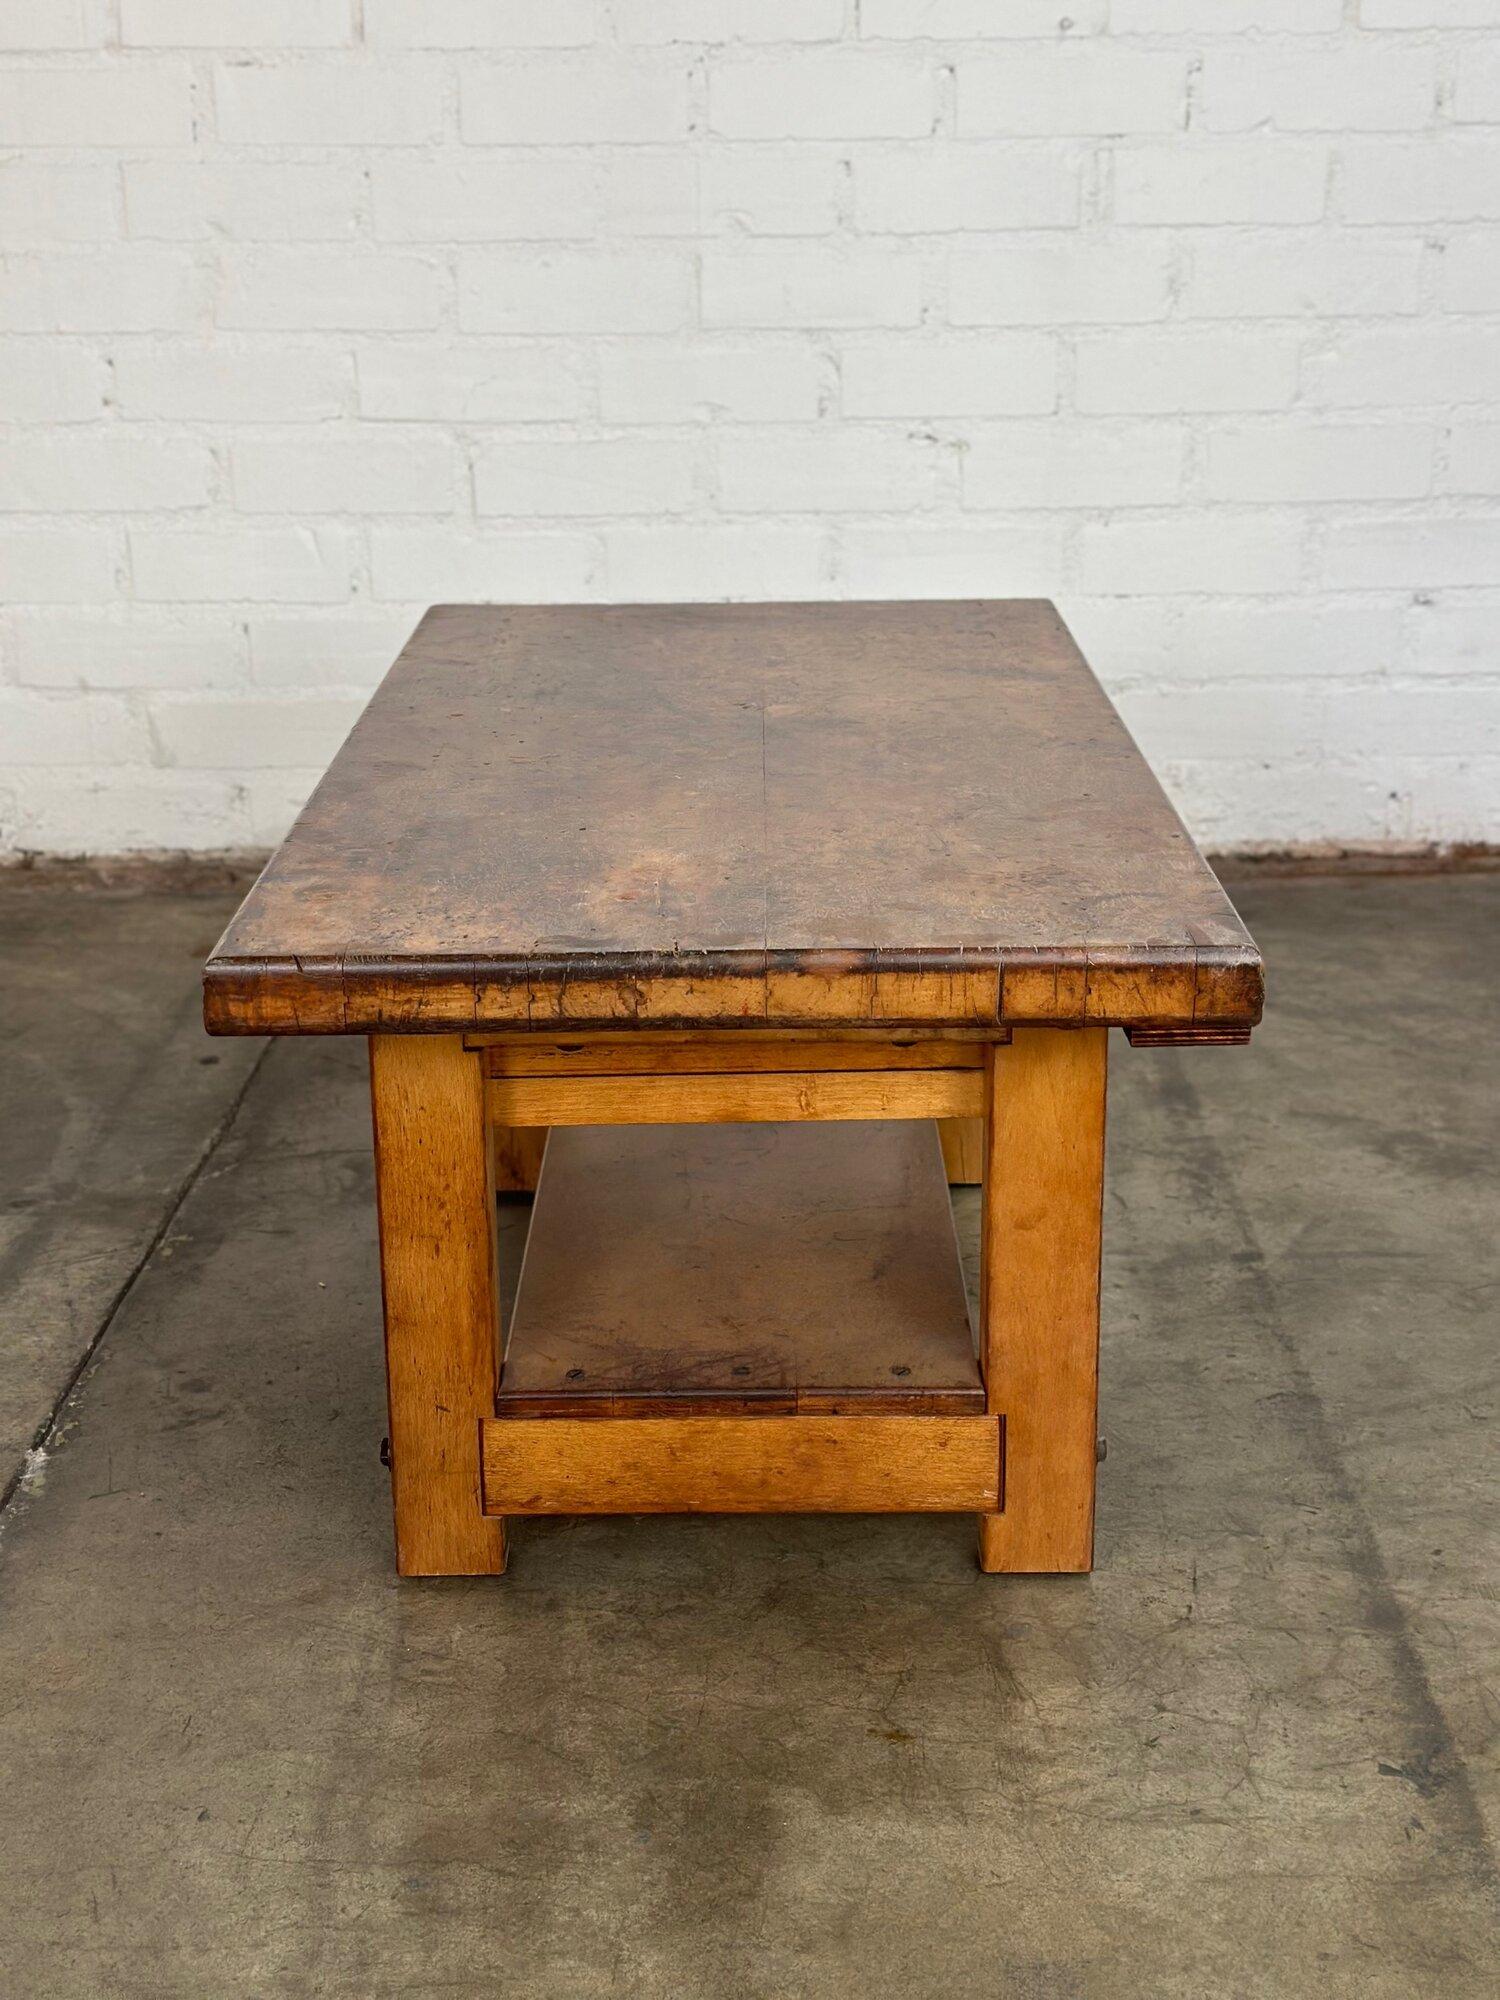 Rustic low profile work bench- reworked 6